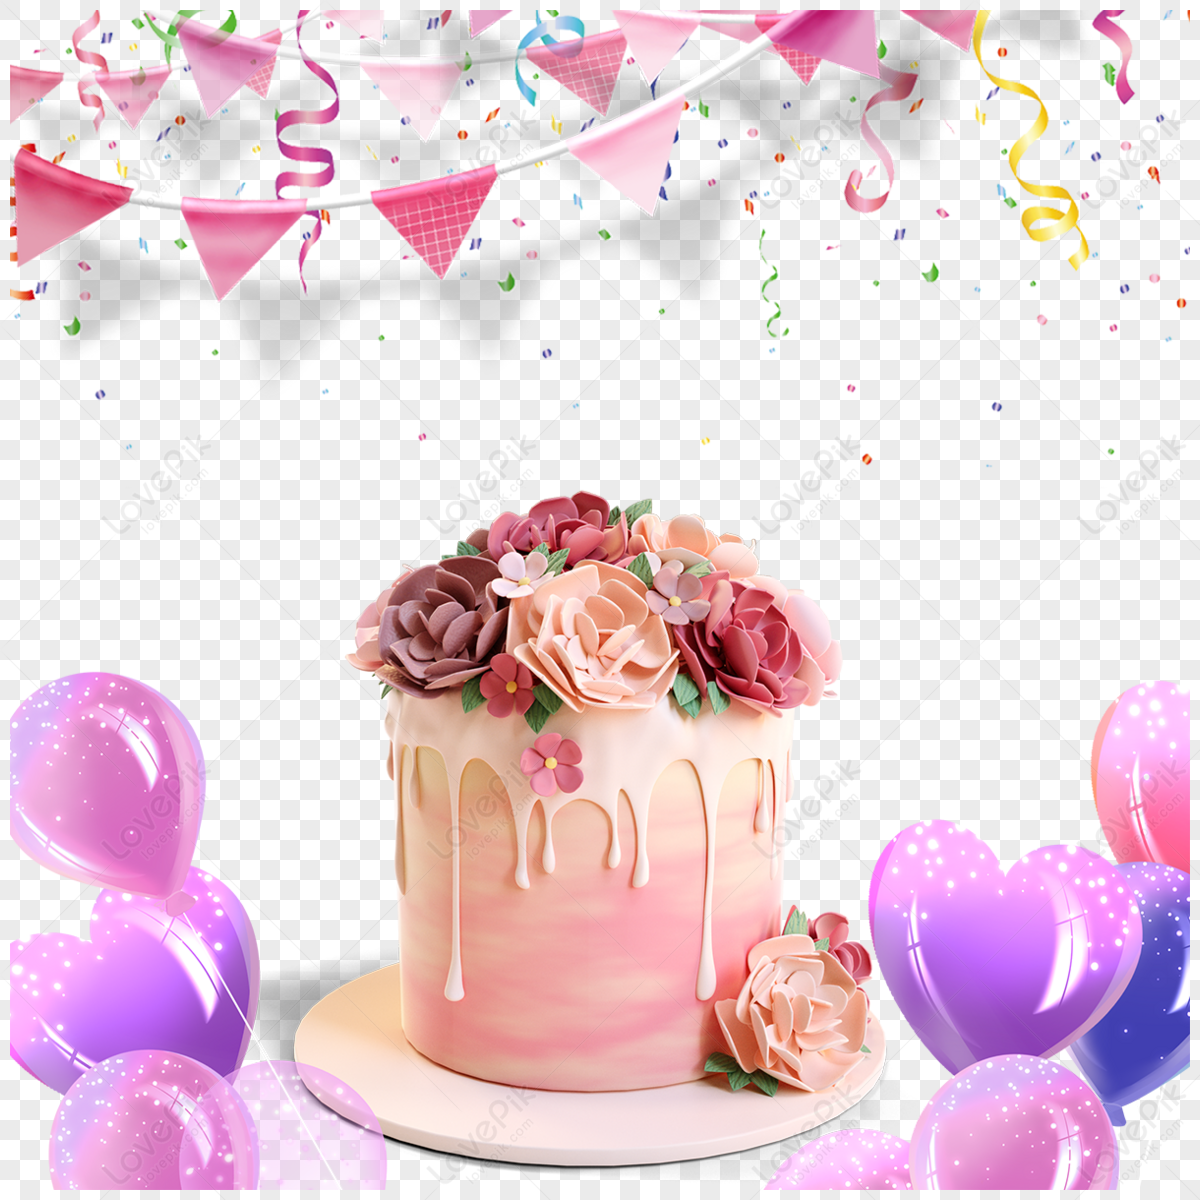 Cake PNG image transparent image download, size: 500x454px